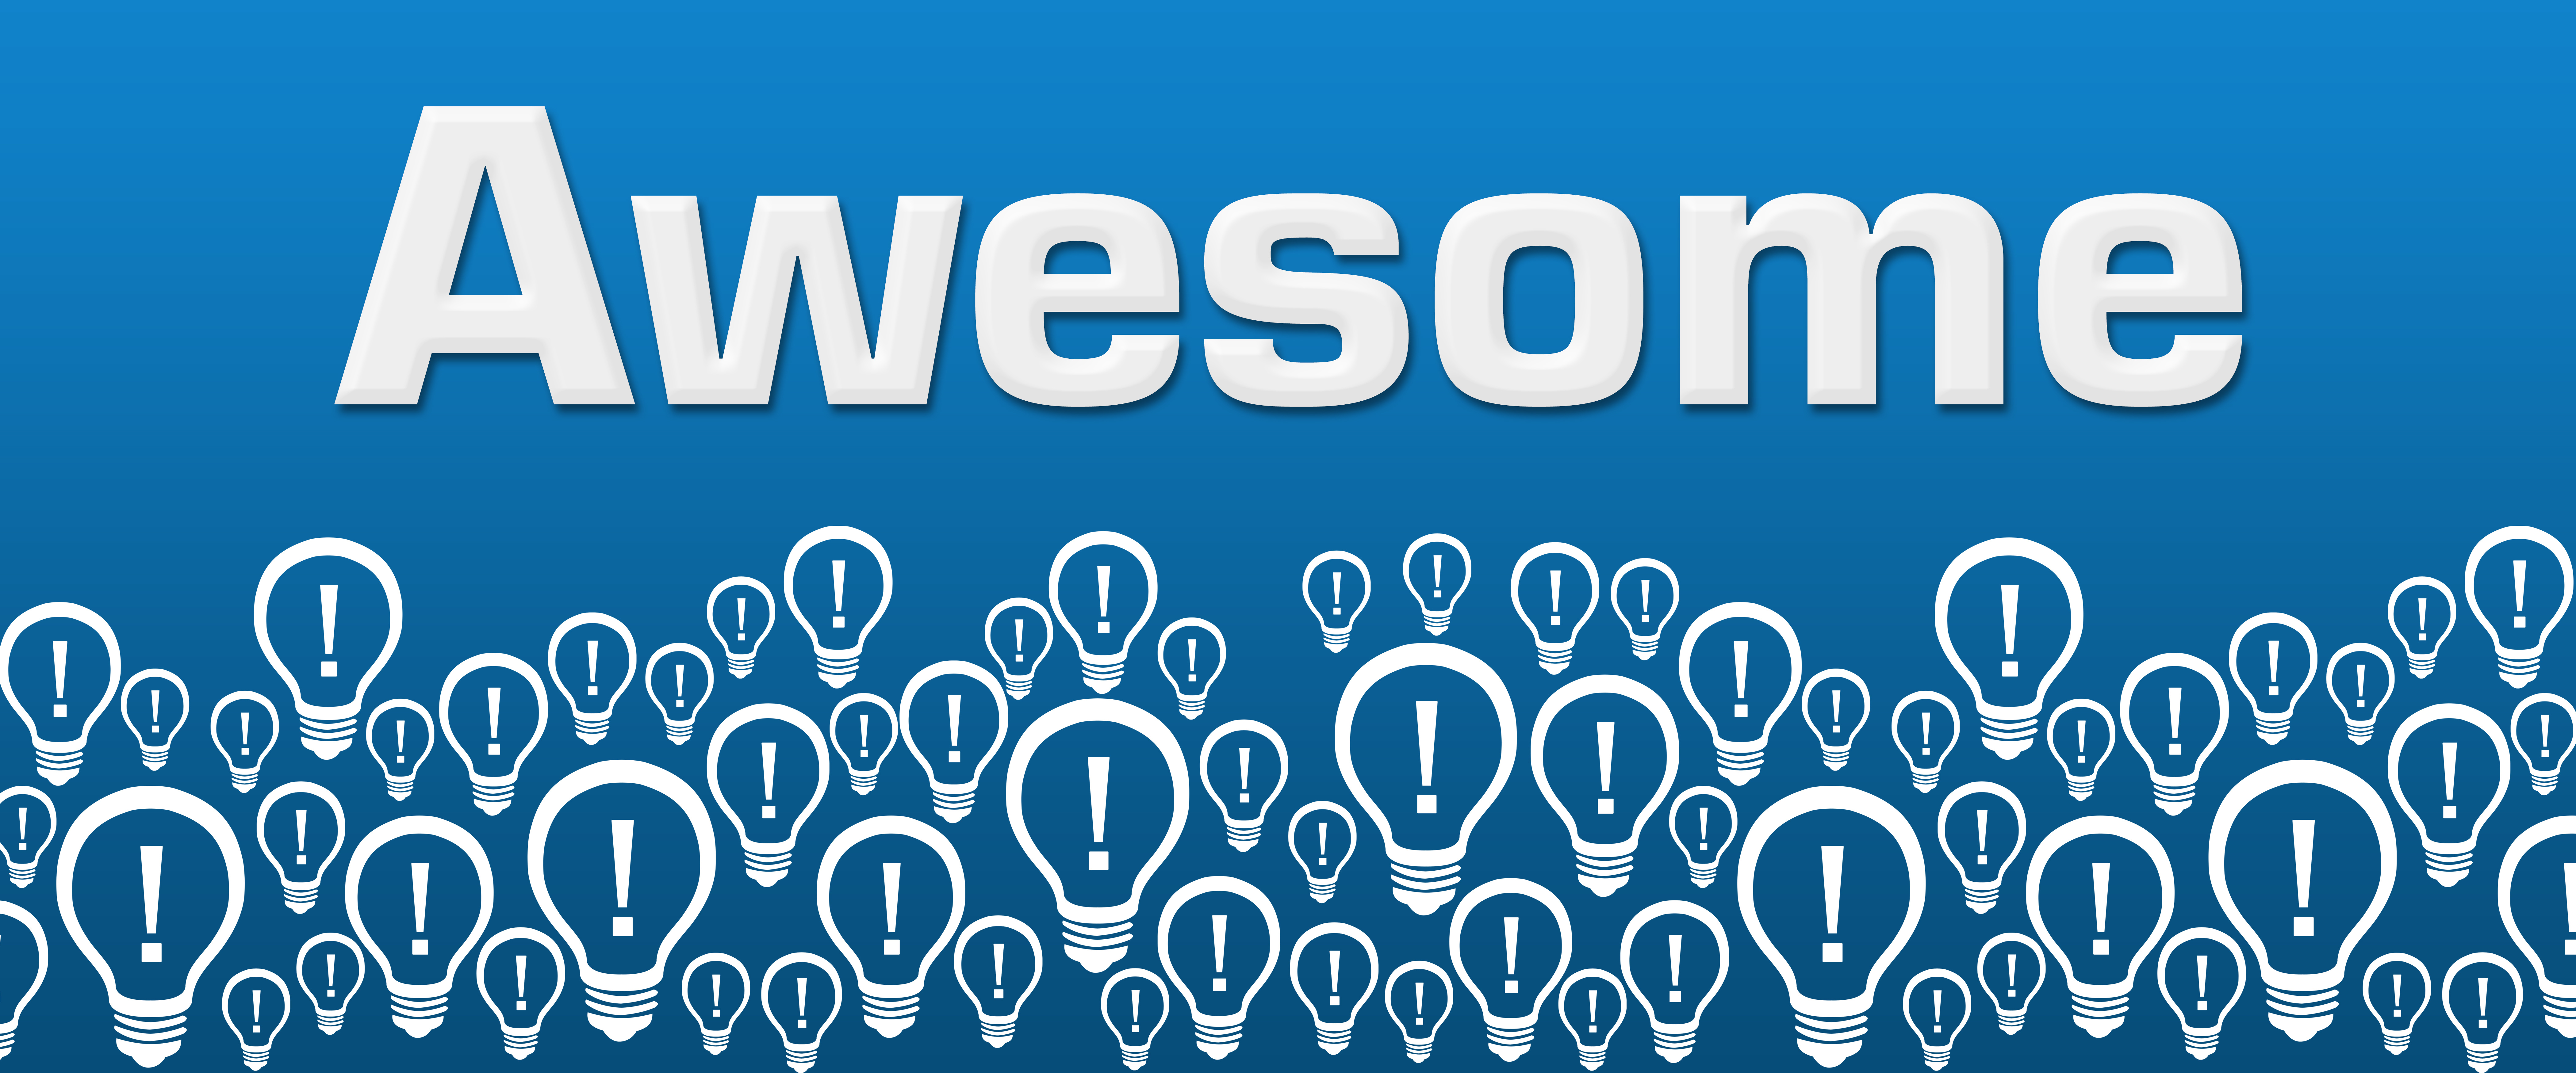 Awesome Blue Background Bulbs Bottom Text